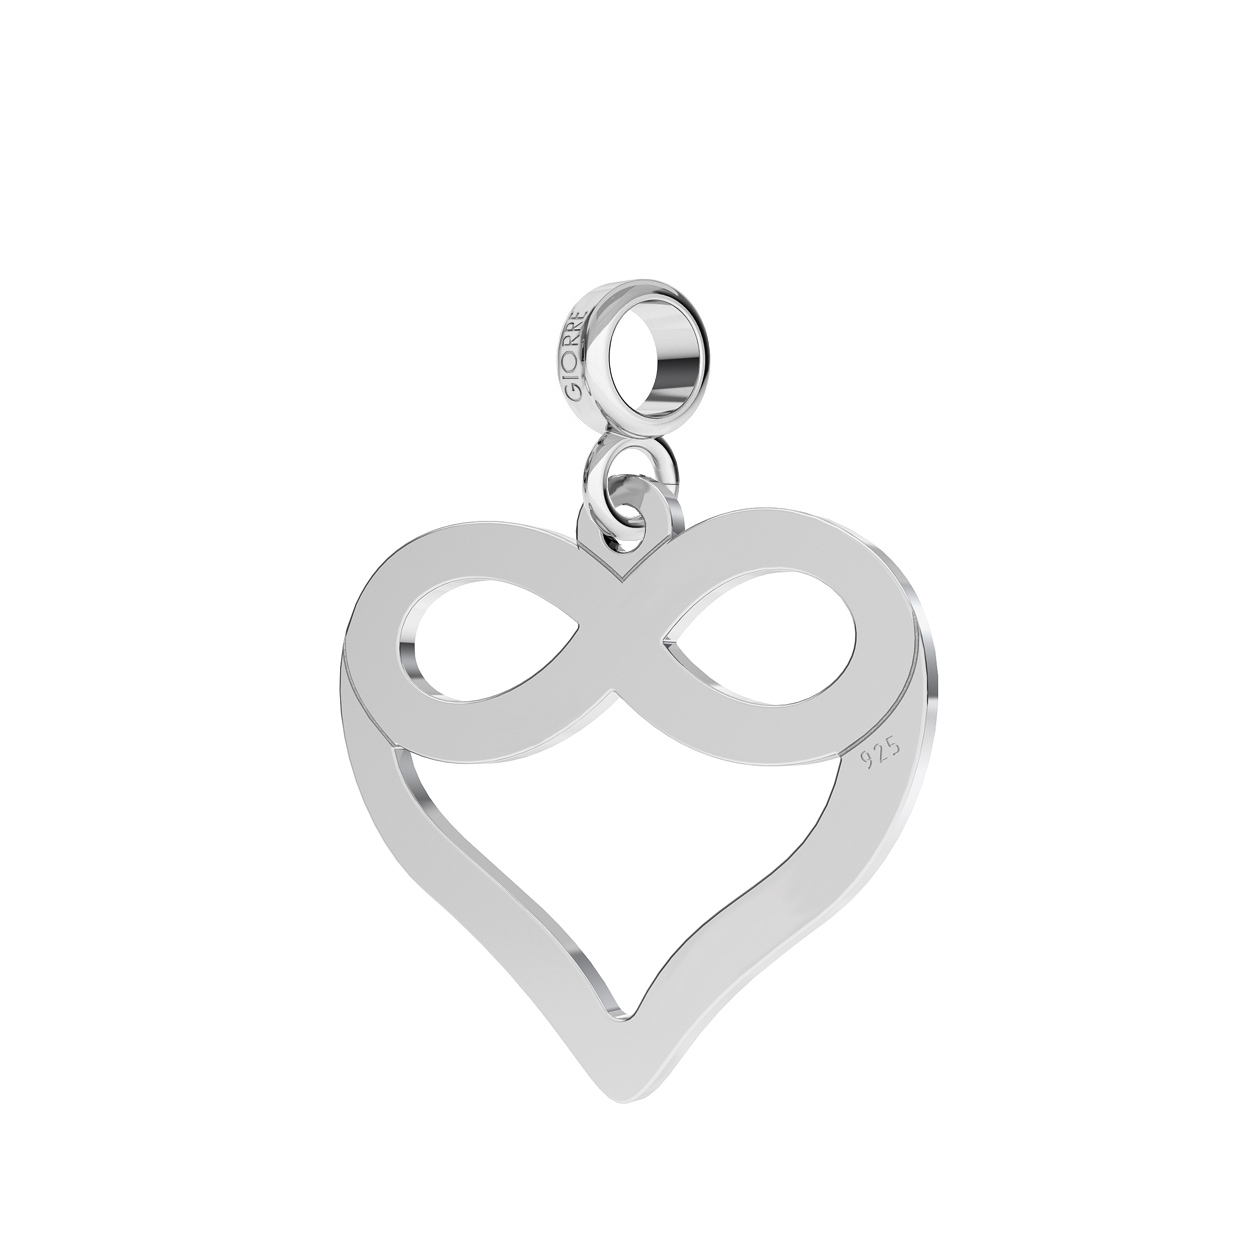 HEART WITH INFINITY SIGN CHARMS 267